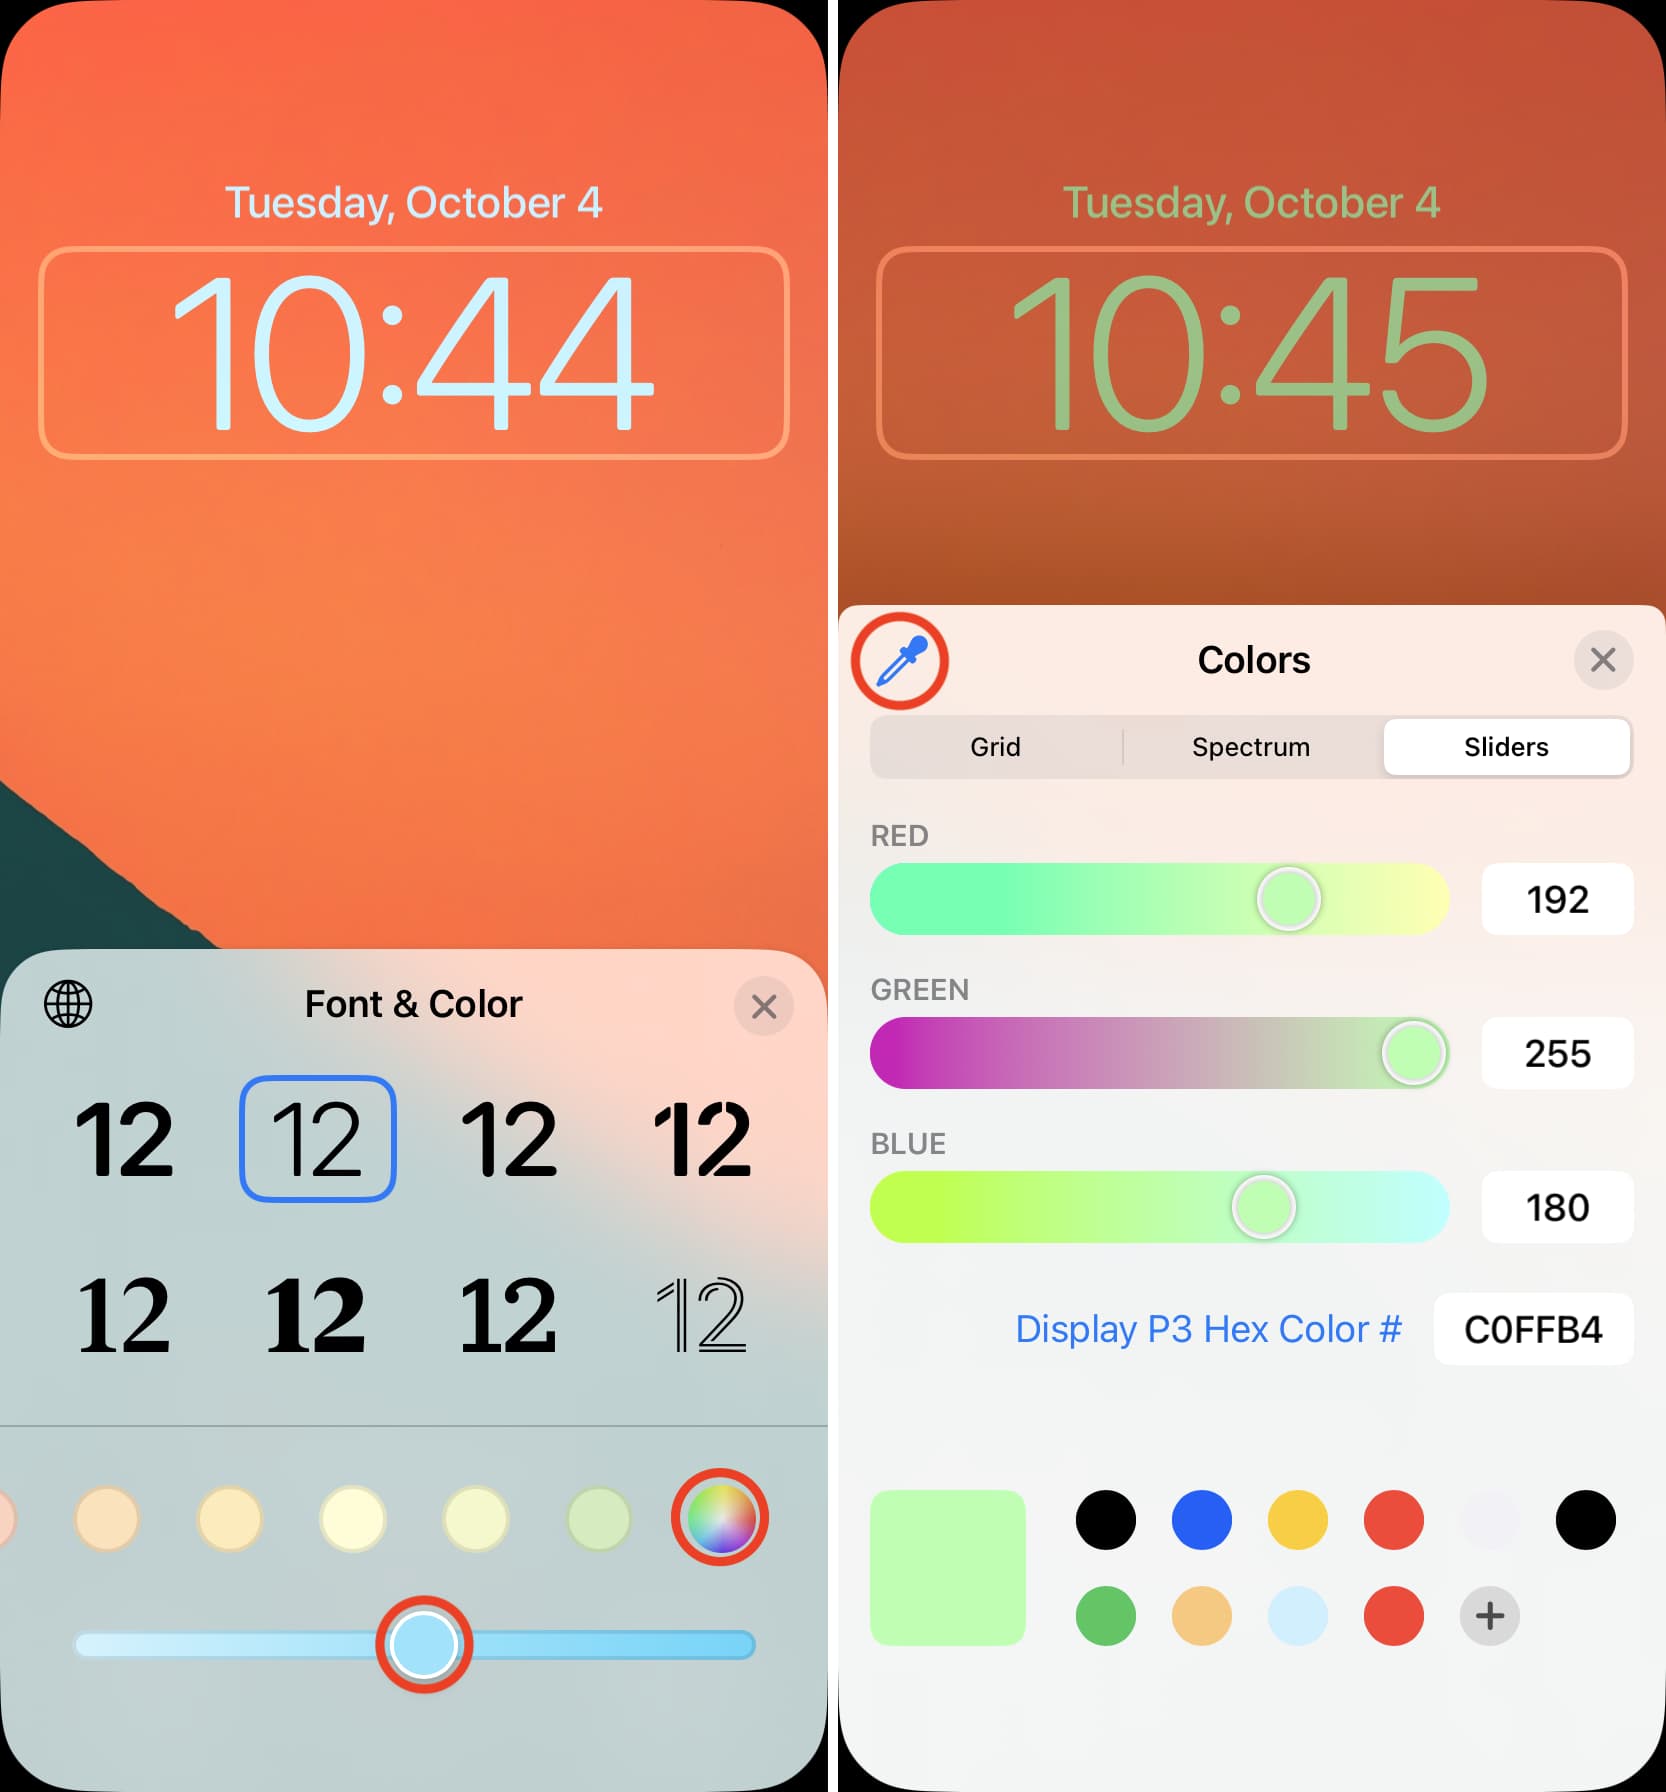 How to change the color & font of iPhone Lock Screen clock